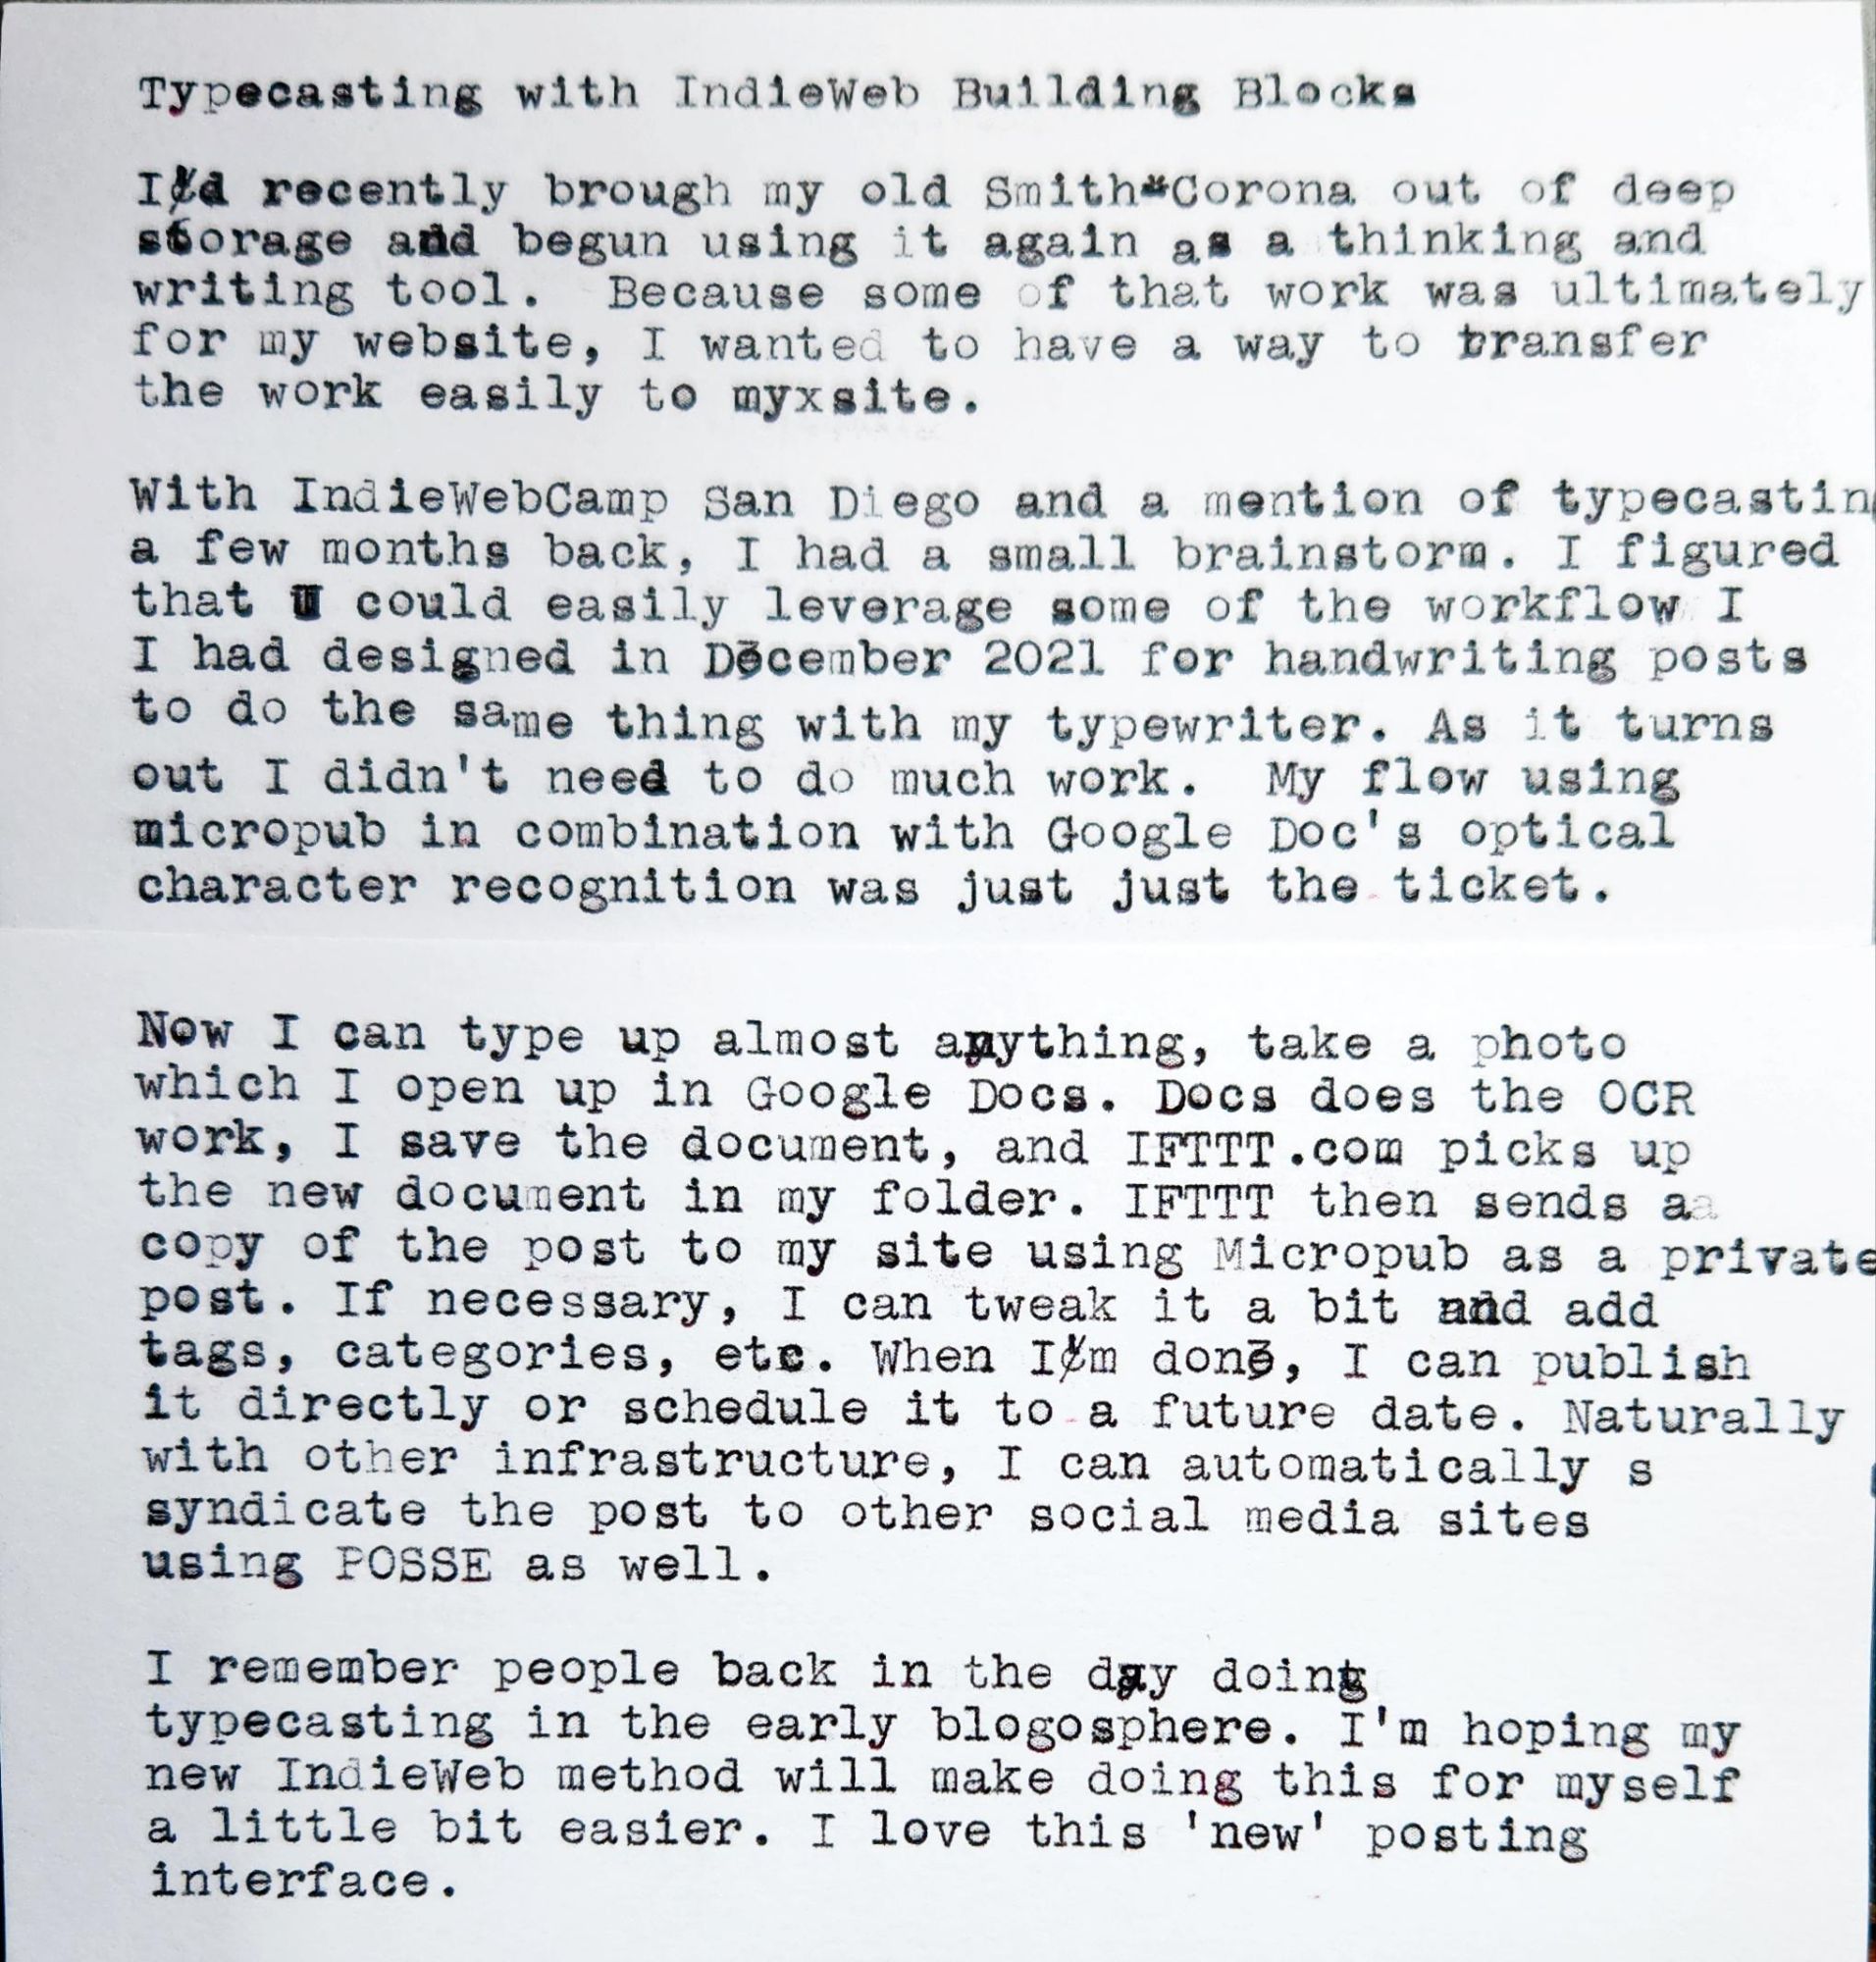 Photo of a typewritten sheet of paper which reads: Typecasting with IndieWeb Building Blocks I recently brough my old Smith-Corona out of deep storage and begun using it again as a thinking and writing tool. Because some of that work was ultimately for my website, I wanted to have a way to transfer the work easily to my site. With IndieWebCamp San Diego and a mention of typecasting a few months back, I had a small brainstorm. I figured that could easily leverage some of the workflow I had designed in December 2021 for handwriting posts to do the same thing with my typewriter. As it turns out, I didn't need to do much work. My flow using micropub in combination with Google Doc's optical character recognition was just just the ticket. Now I can type up almost anything, take a photo which I open up in Google Docs. Docs does the OCR work, I save the document, and IFTTT.com picks up the new document in my folder. IFTTT then sends aa copy of the post to my site using Micropub as a private post. If necessary, I can tweak it a bit and add tags, categories, etc. When I'm done, I can publish it directly or schedule it to a future date. Naturally with other infrastructure, I can automatically syndicate the post to other social media sites using POSSE as well. I remember people back in the day doing typecasting in the early blogosphere. I'm hoping my new IndieWeb method will make doing this for myself a little bit easier. I love this 'new' posting interface.